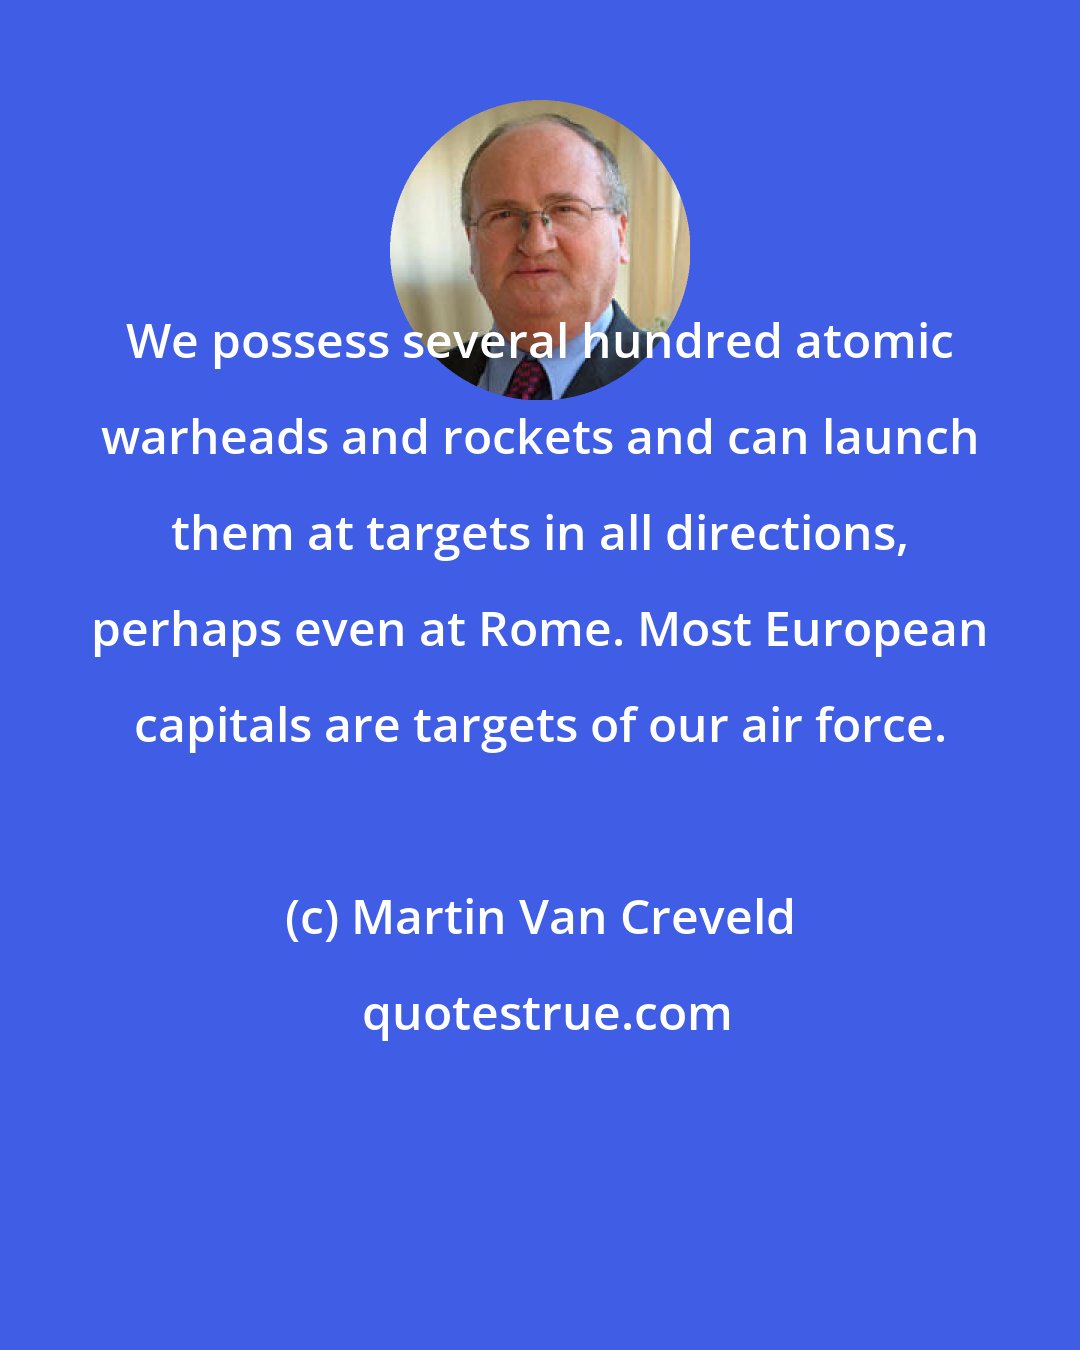 Martin Van Creveld: We possess several hundred atomic warheads and rockets and can launch them at targets in all directions, perhaps even at Rome. Most European capitals are targets of our air force.